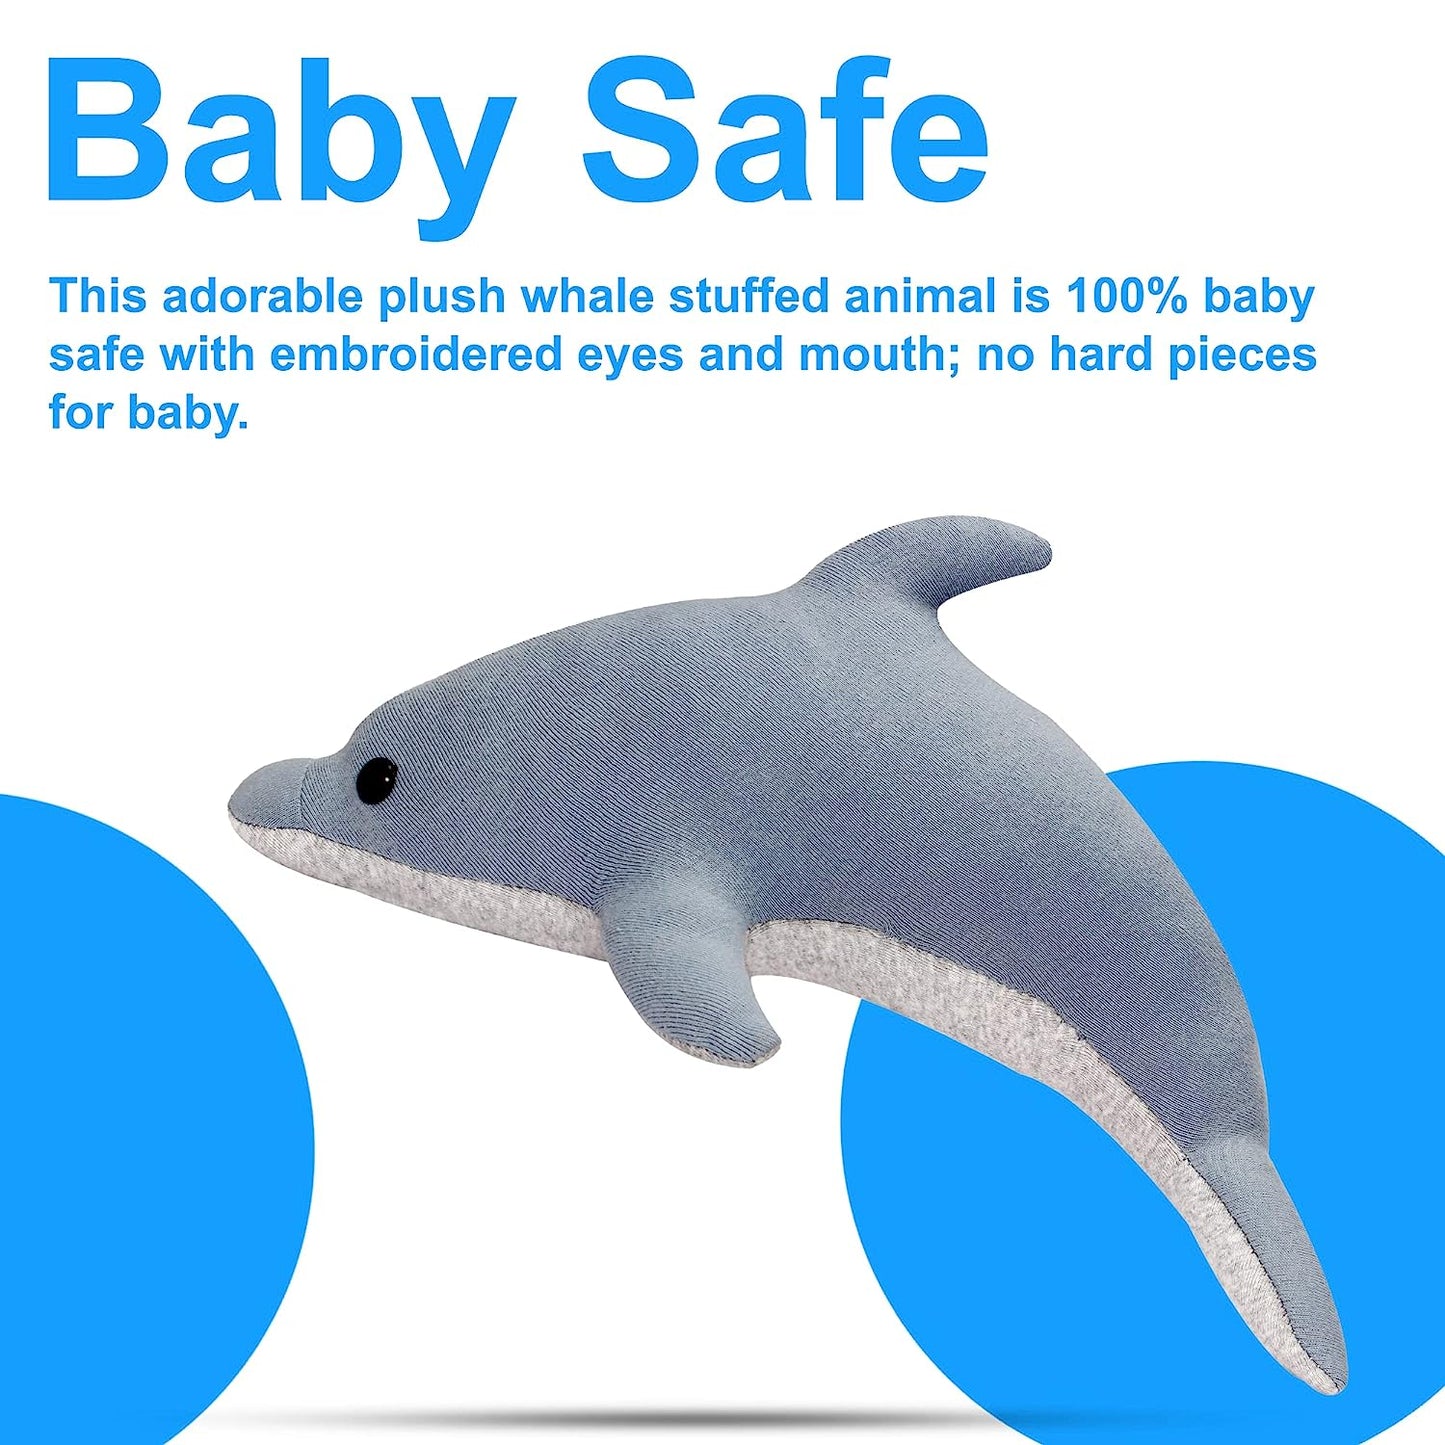 Dolphin Stuffed Animals Soft Toy with Cute Black Eyes for Kids (Blue)